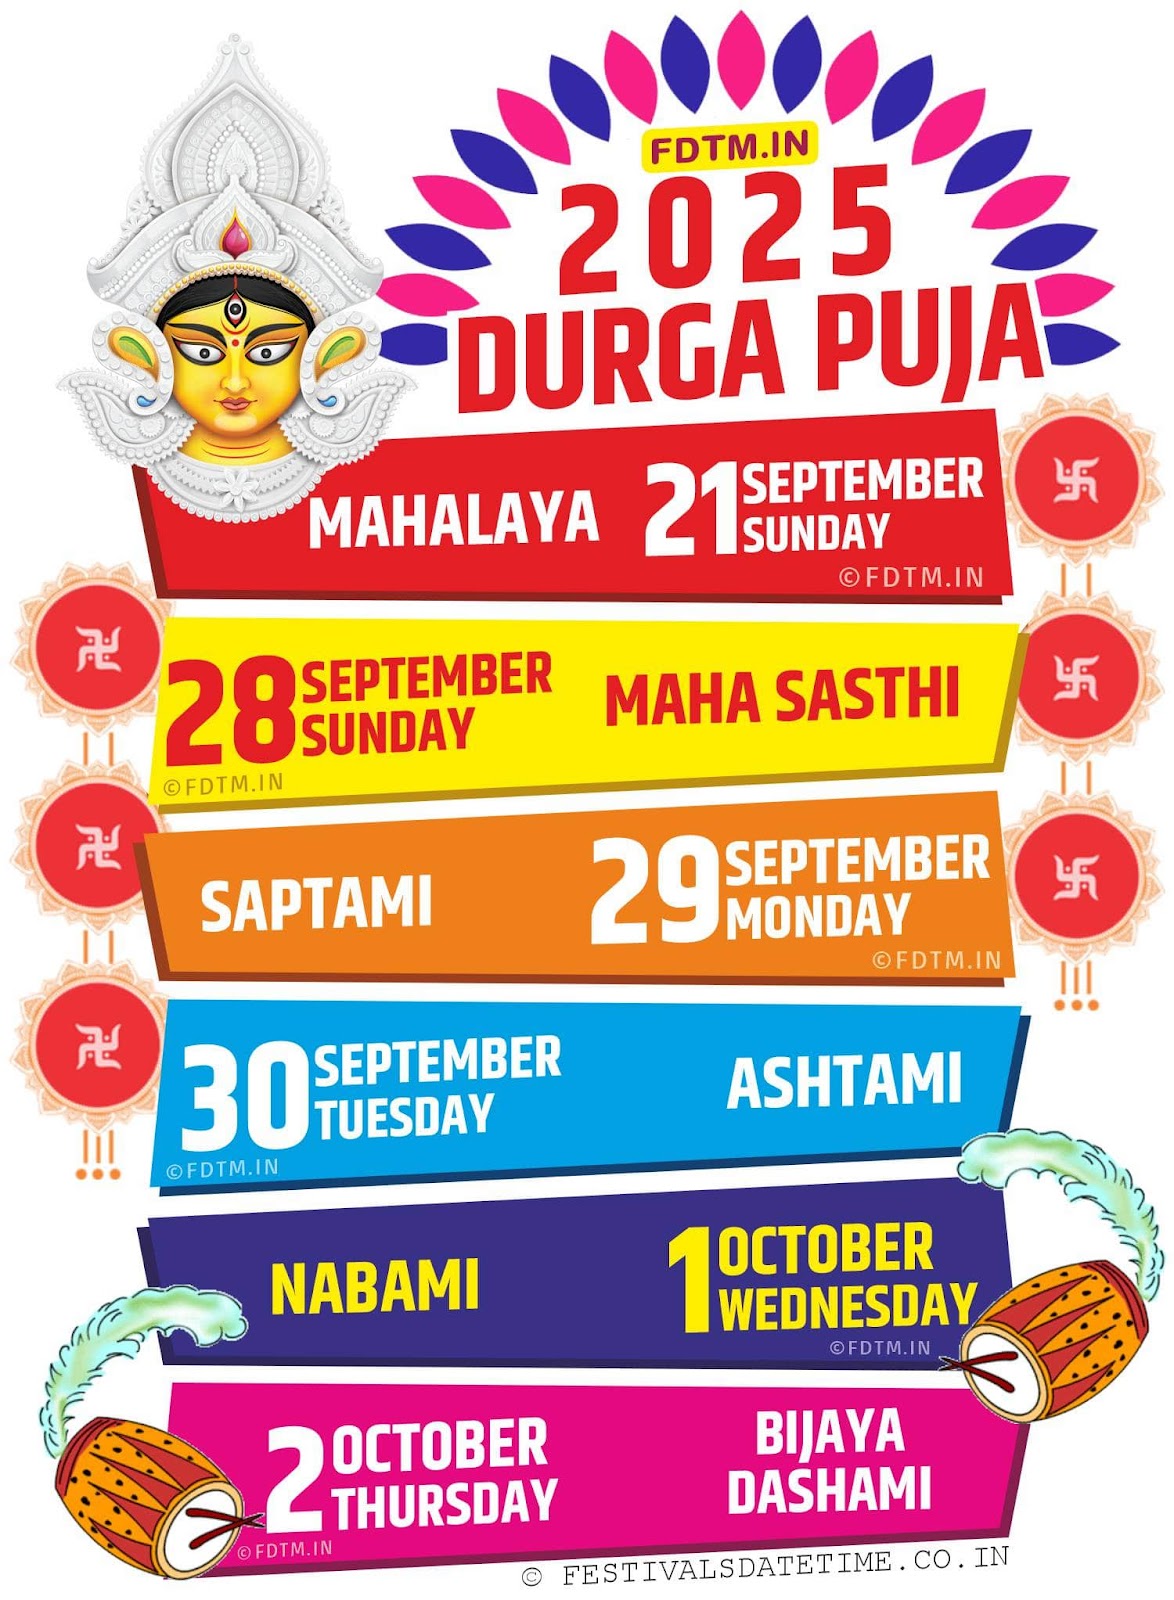 Durga Puja 2025 Durga Puja 2025 Date And Time Schedule Festivals Date Time